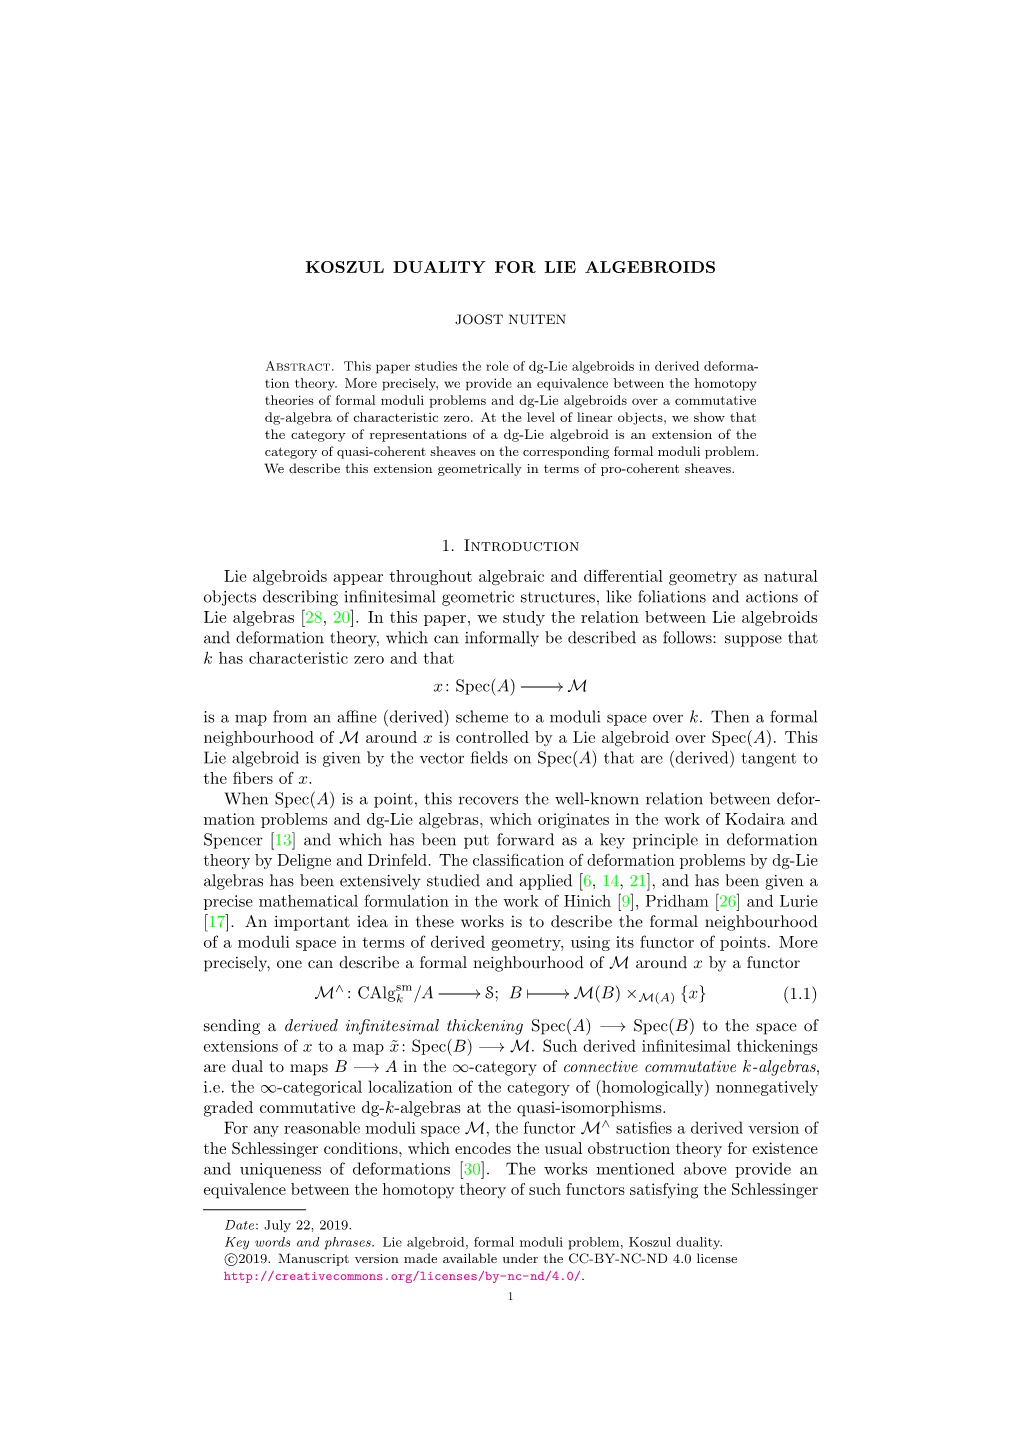 KOSZUL DUALITY for LIE ALGEBROIDS 1. Introduction Lie Algebroids Appear Throughout Algebraic and Differential Geometry As Natura